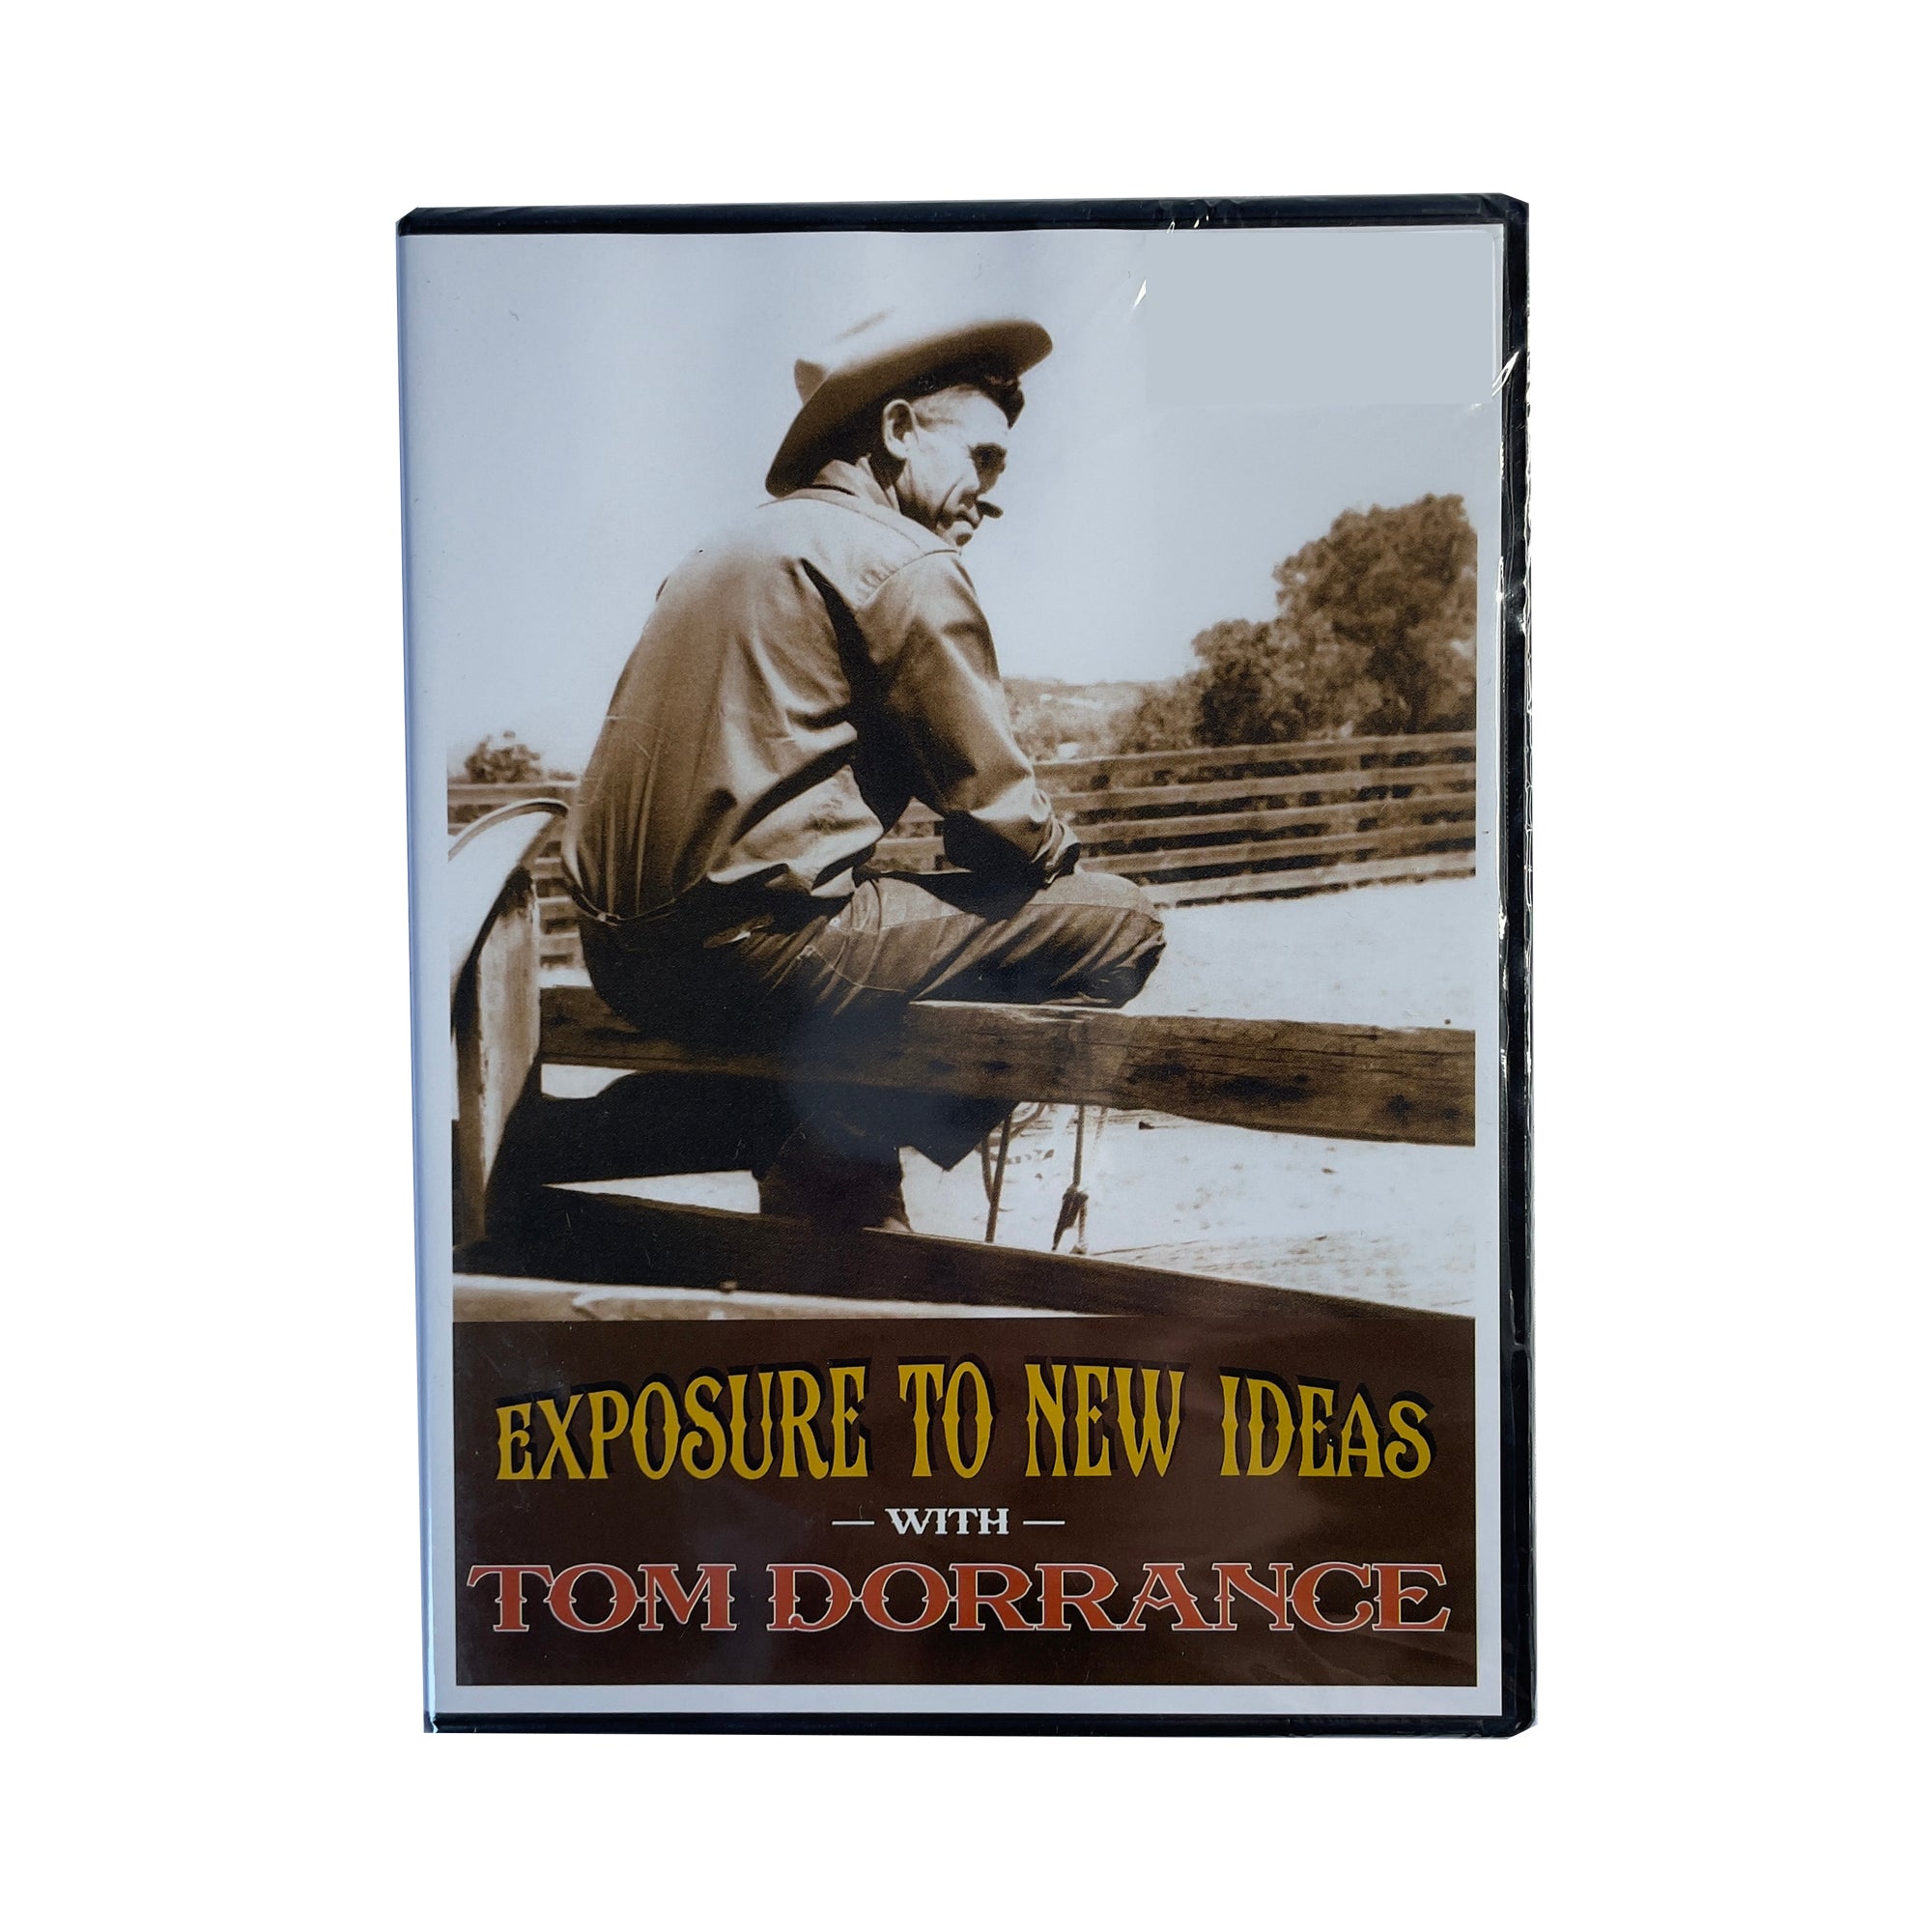 Exposure to New Ideas DVD by Tom Dorrance